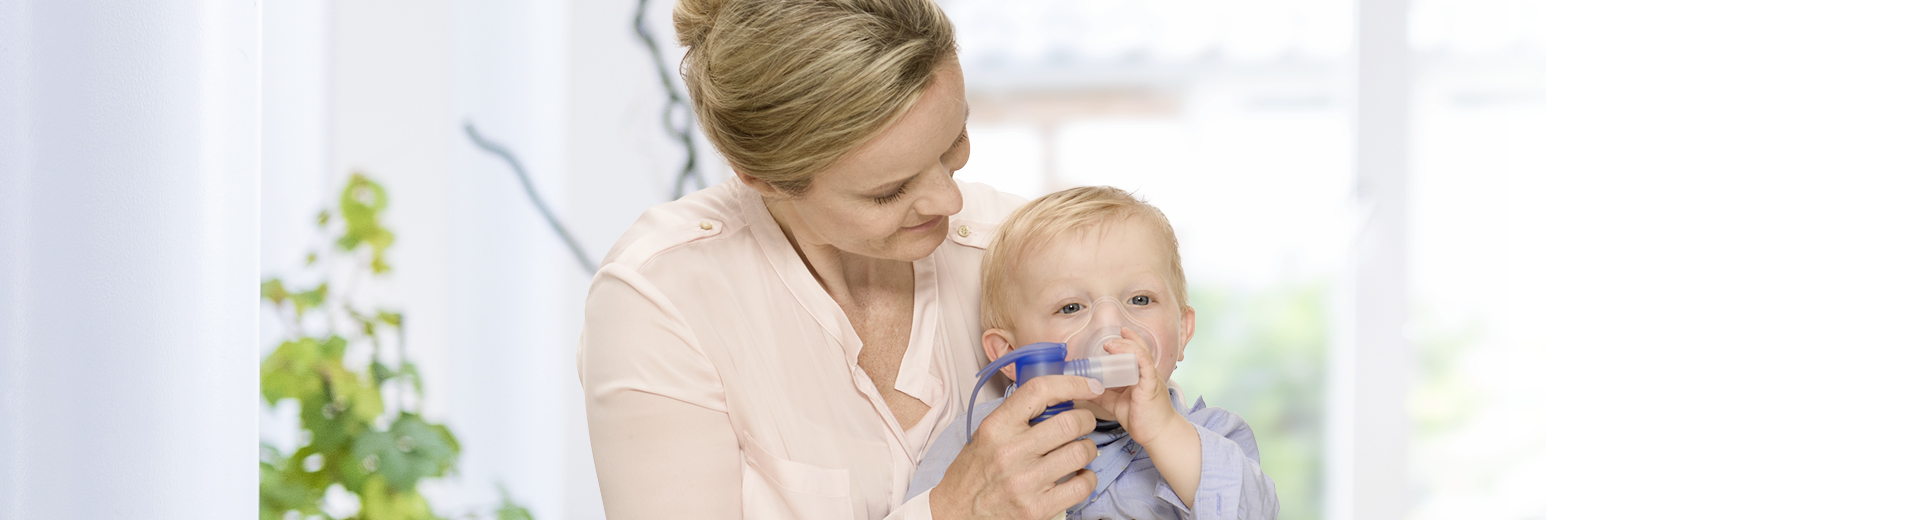 How to use a nebuliser – Using a nebuliser is easy